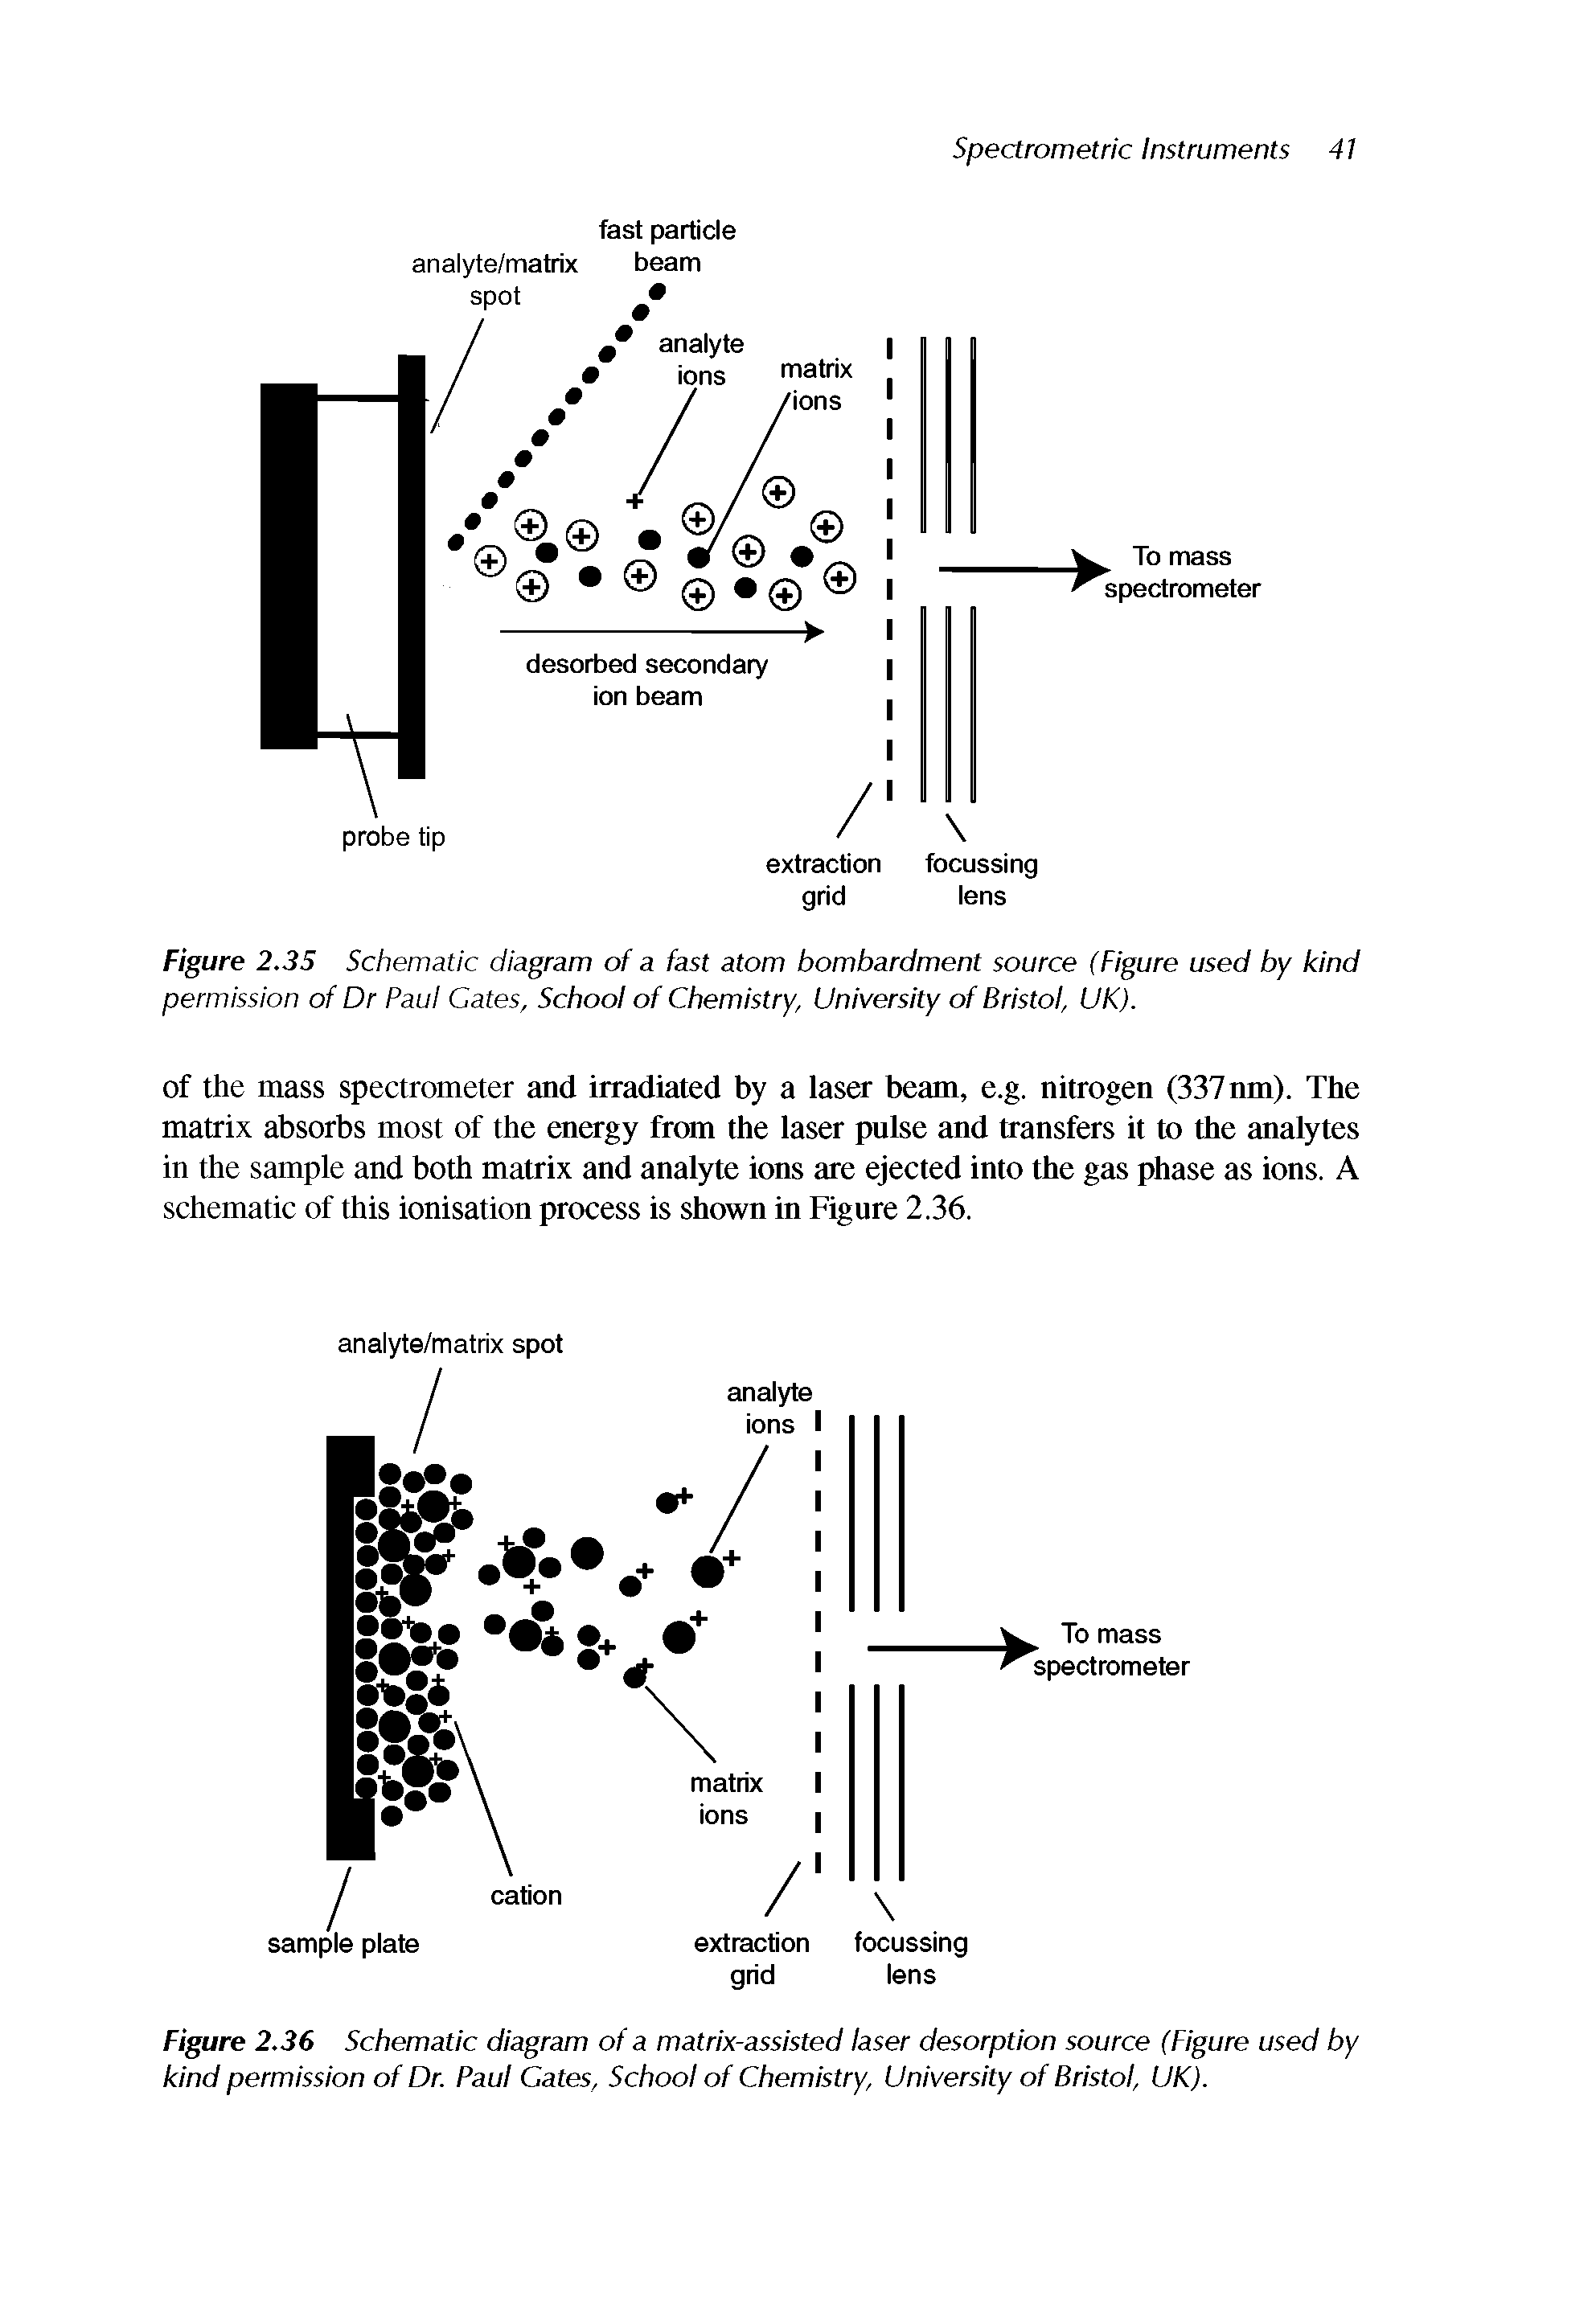 Figure 2.35 Schematic diagram of a fast atom bombardment source (Figure used by kind permission of Dr Paul Cates, School of Chemistry, University of Bristol, UK).